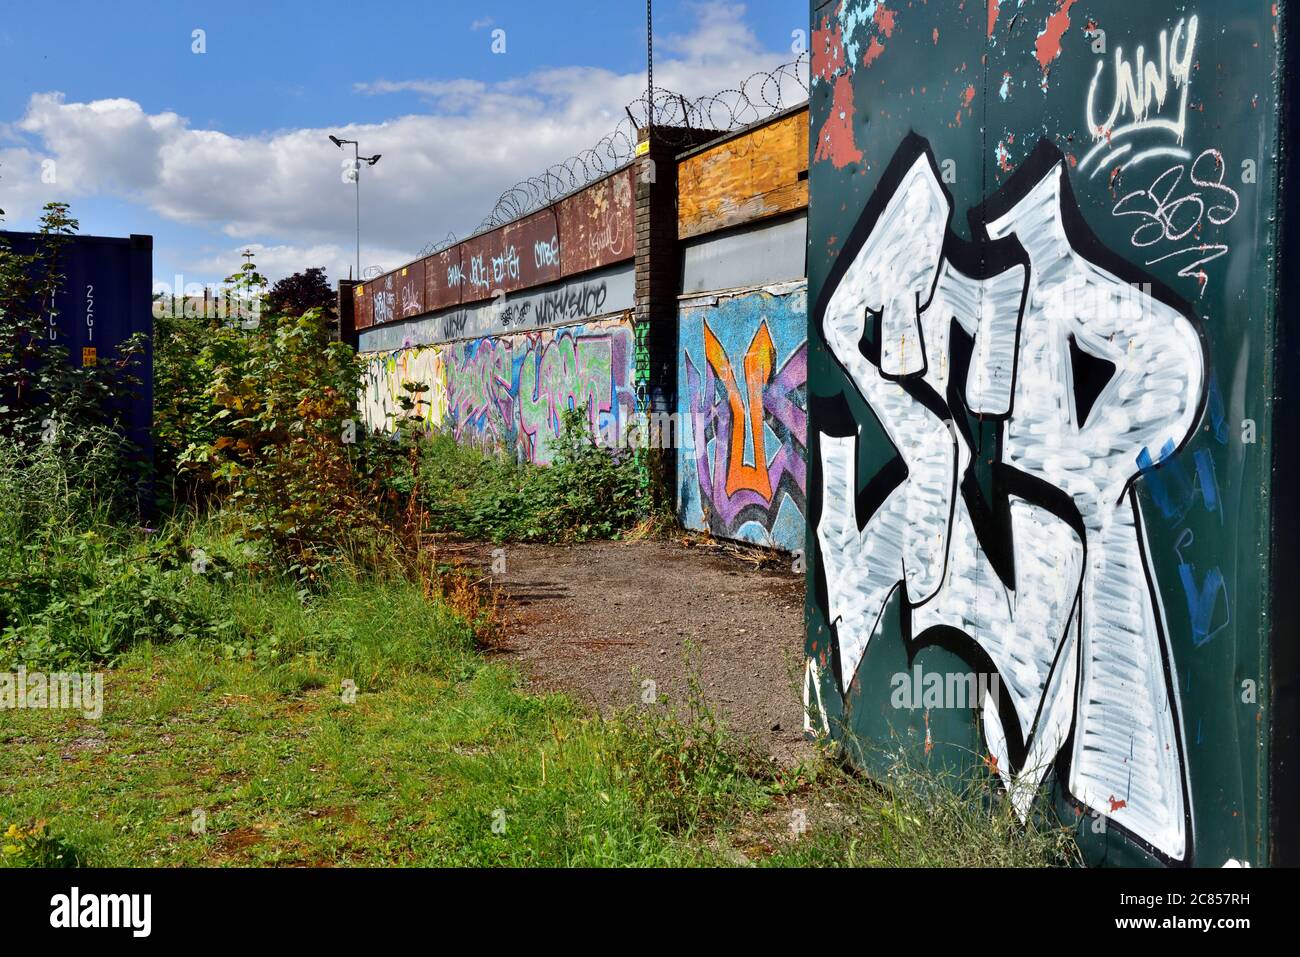 Derelict, abandoned buildings and shipping containers covered in graffiti Stock Photo